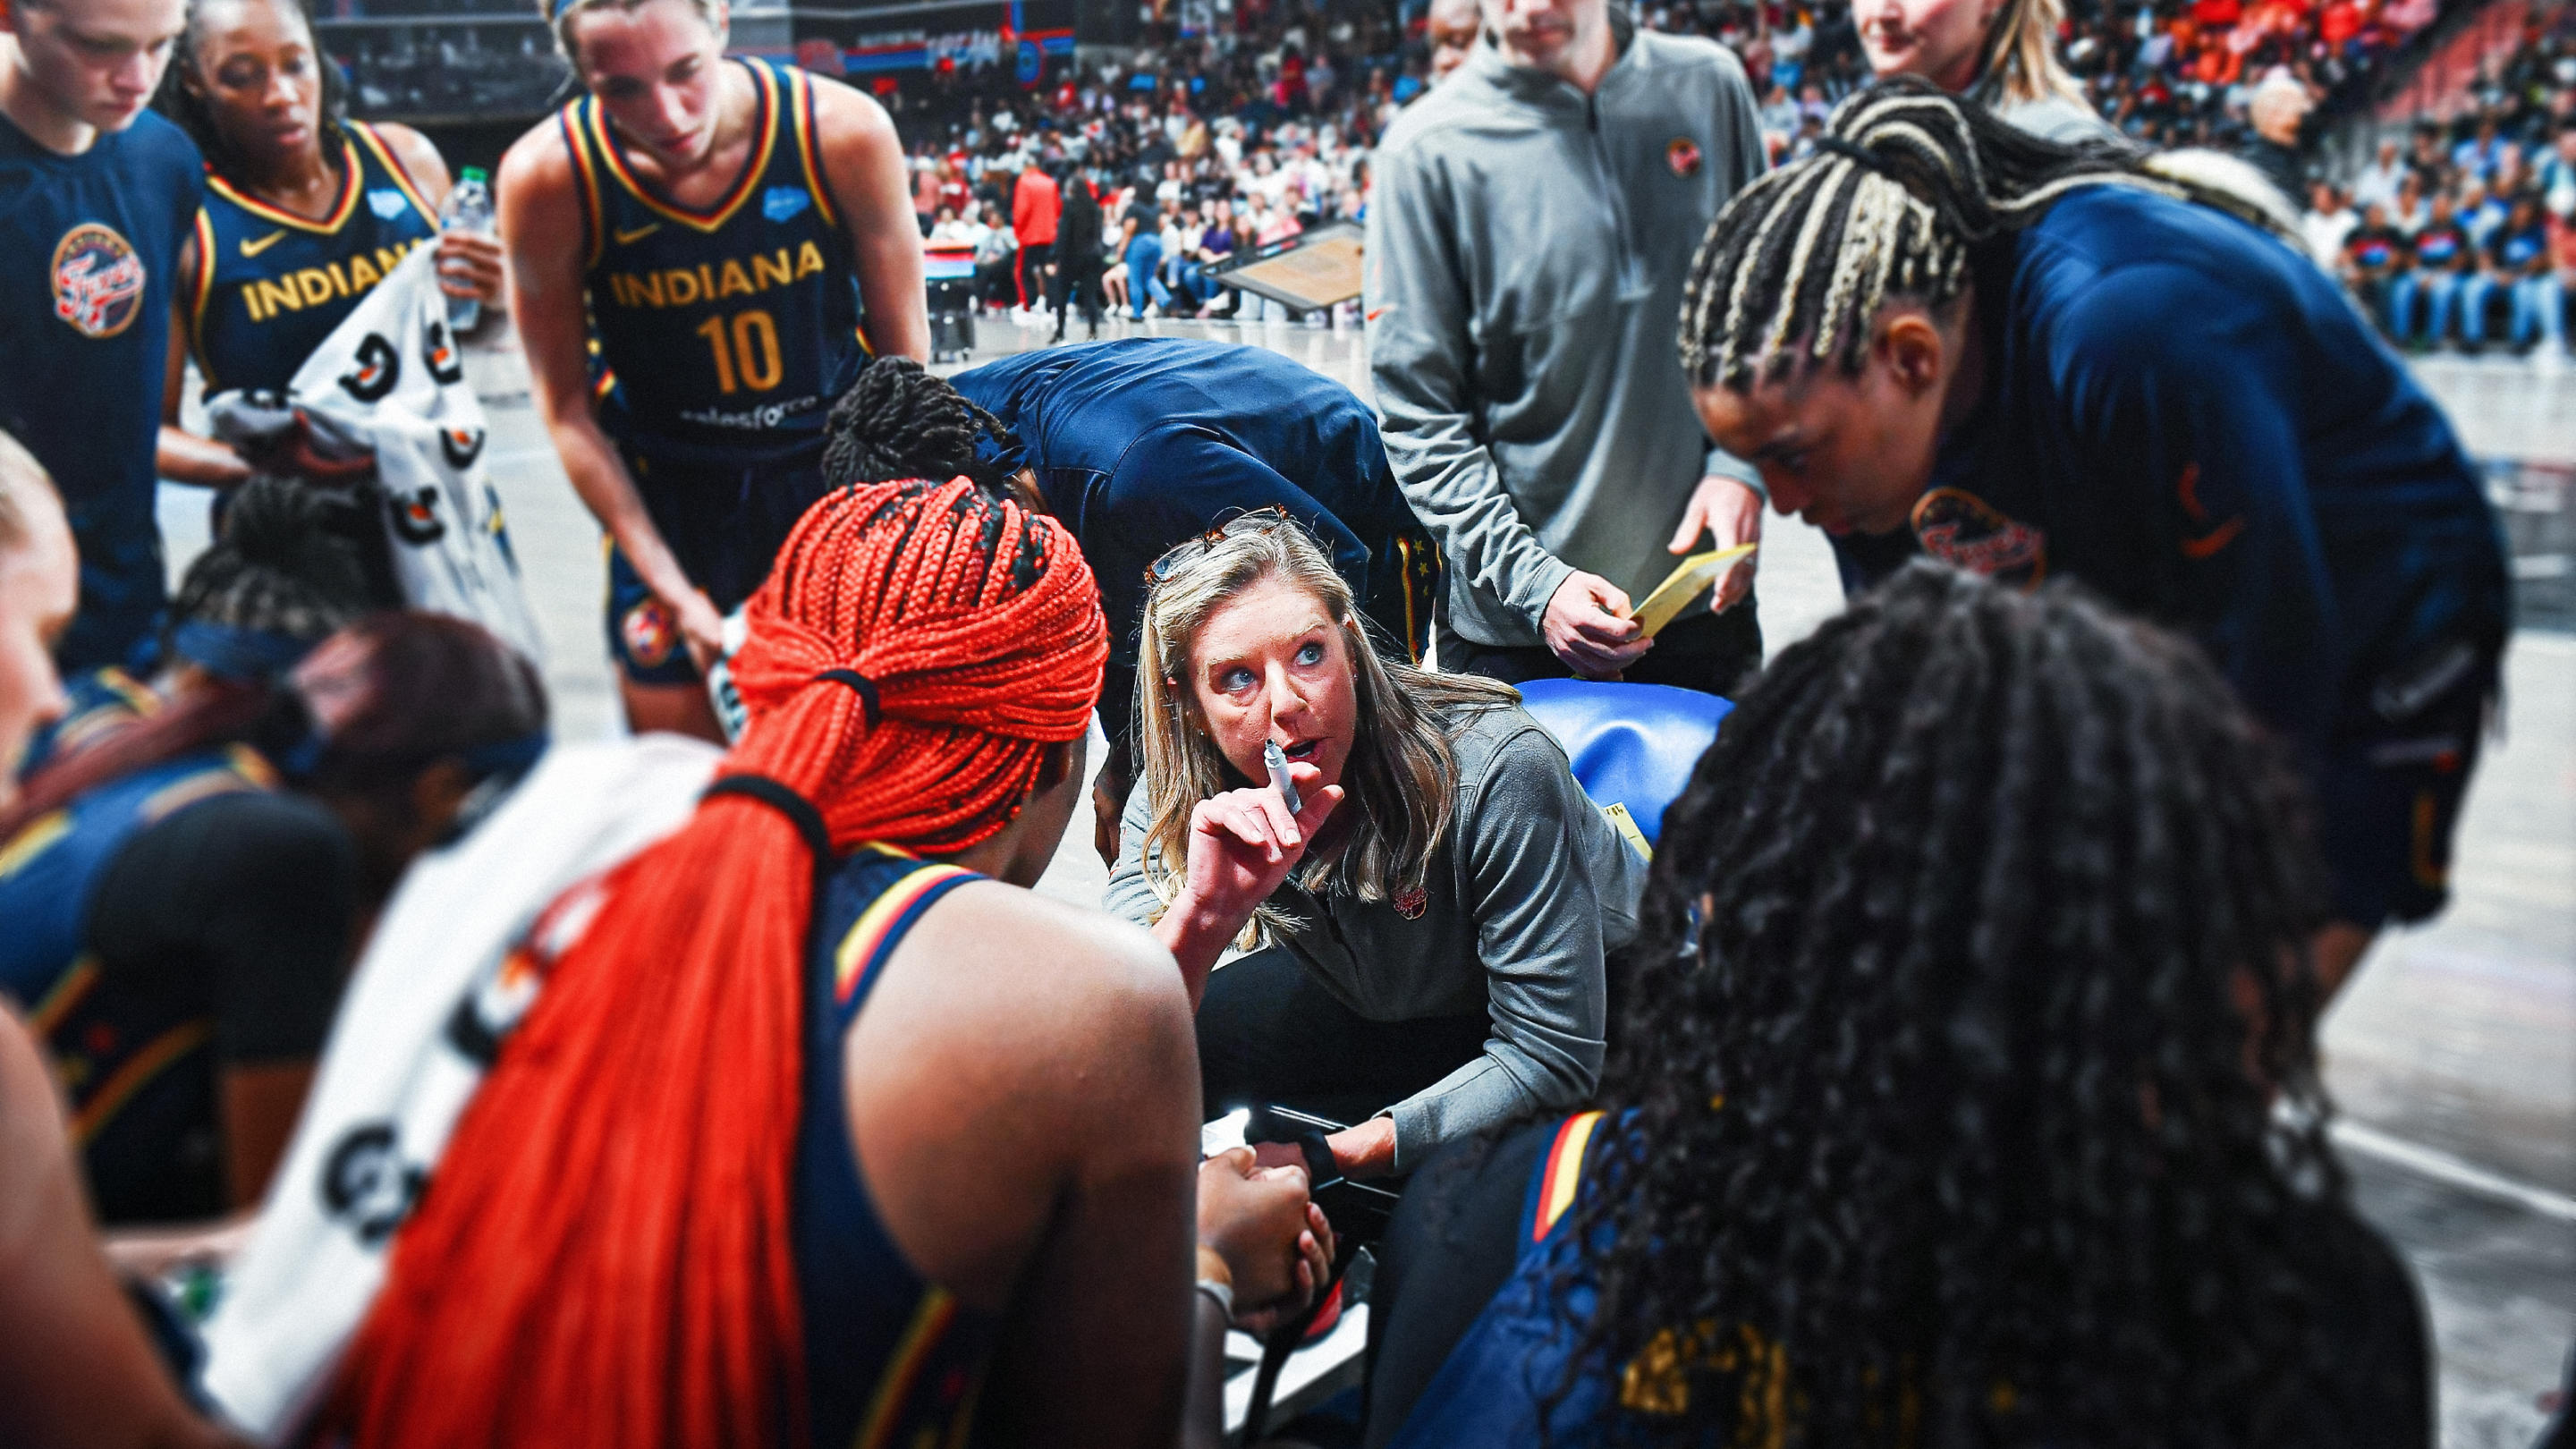 Christie Sides recently completed her first season as Indiana Fever head coach, leading a young squad that includes the 2023 No. 1 overall pick and the 2022 No. 2 overall pick. (Photo by Rich von Biberstein/Icon Sportswire via Getty Images)